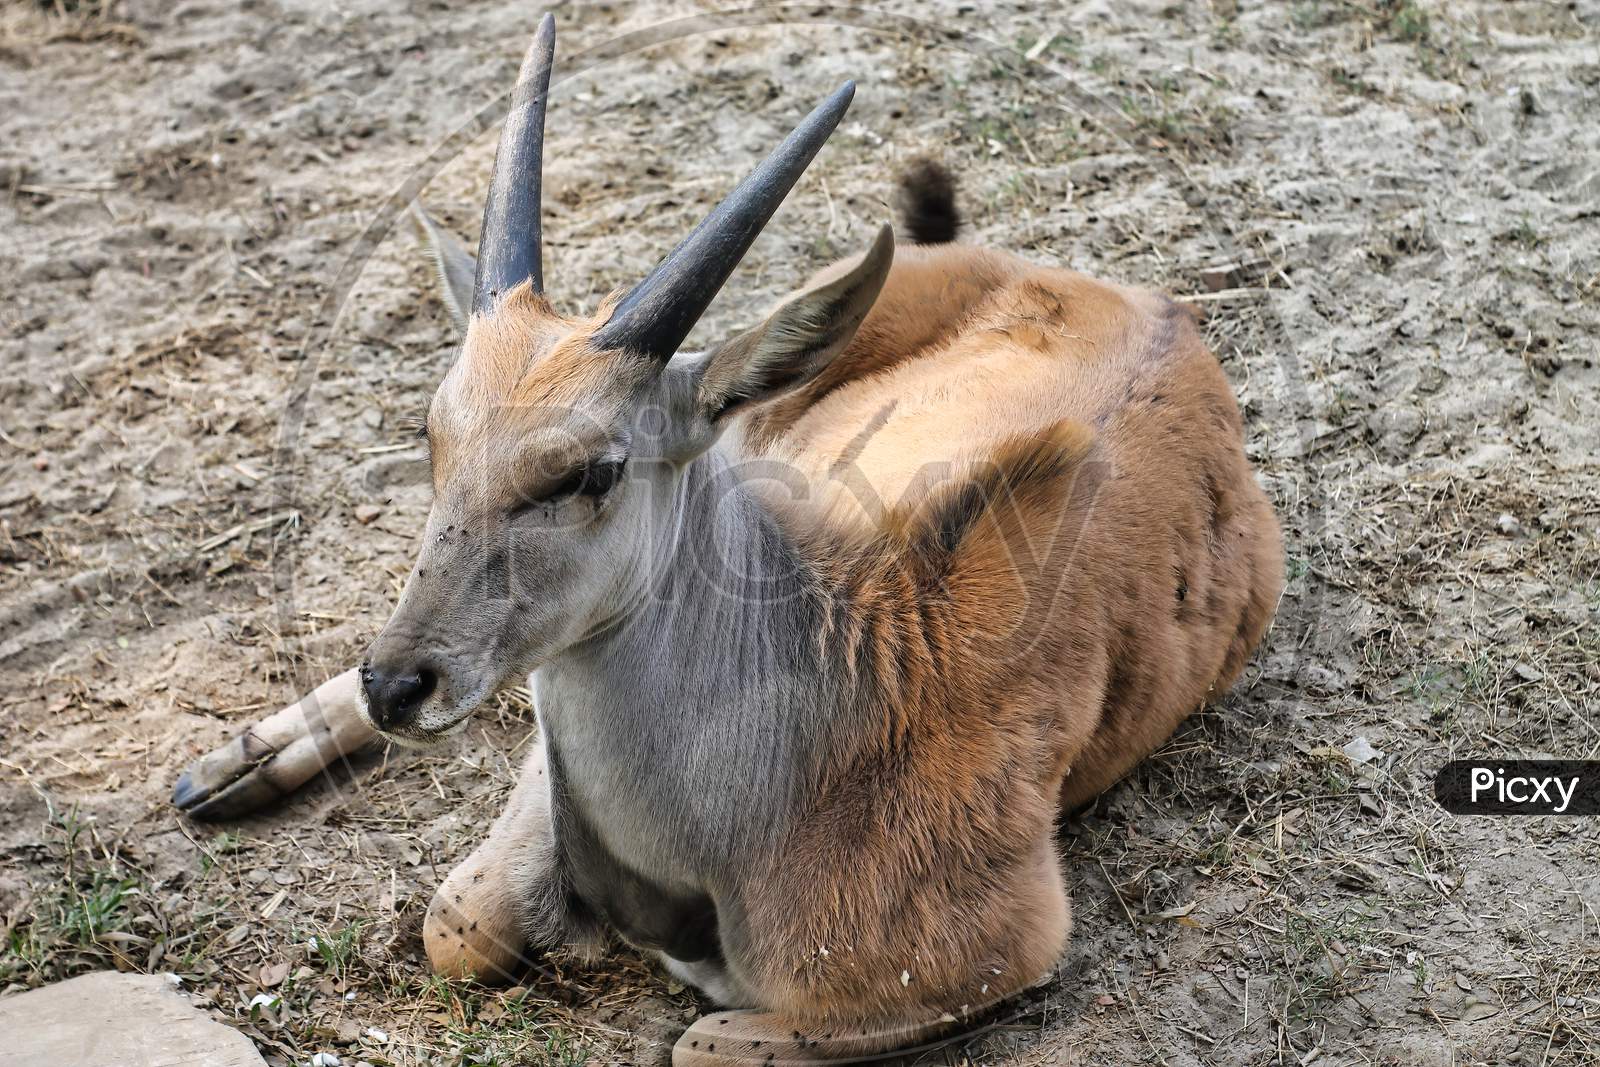 Common Eland (Taurotragus Oryx) Is Sitting On The Ground